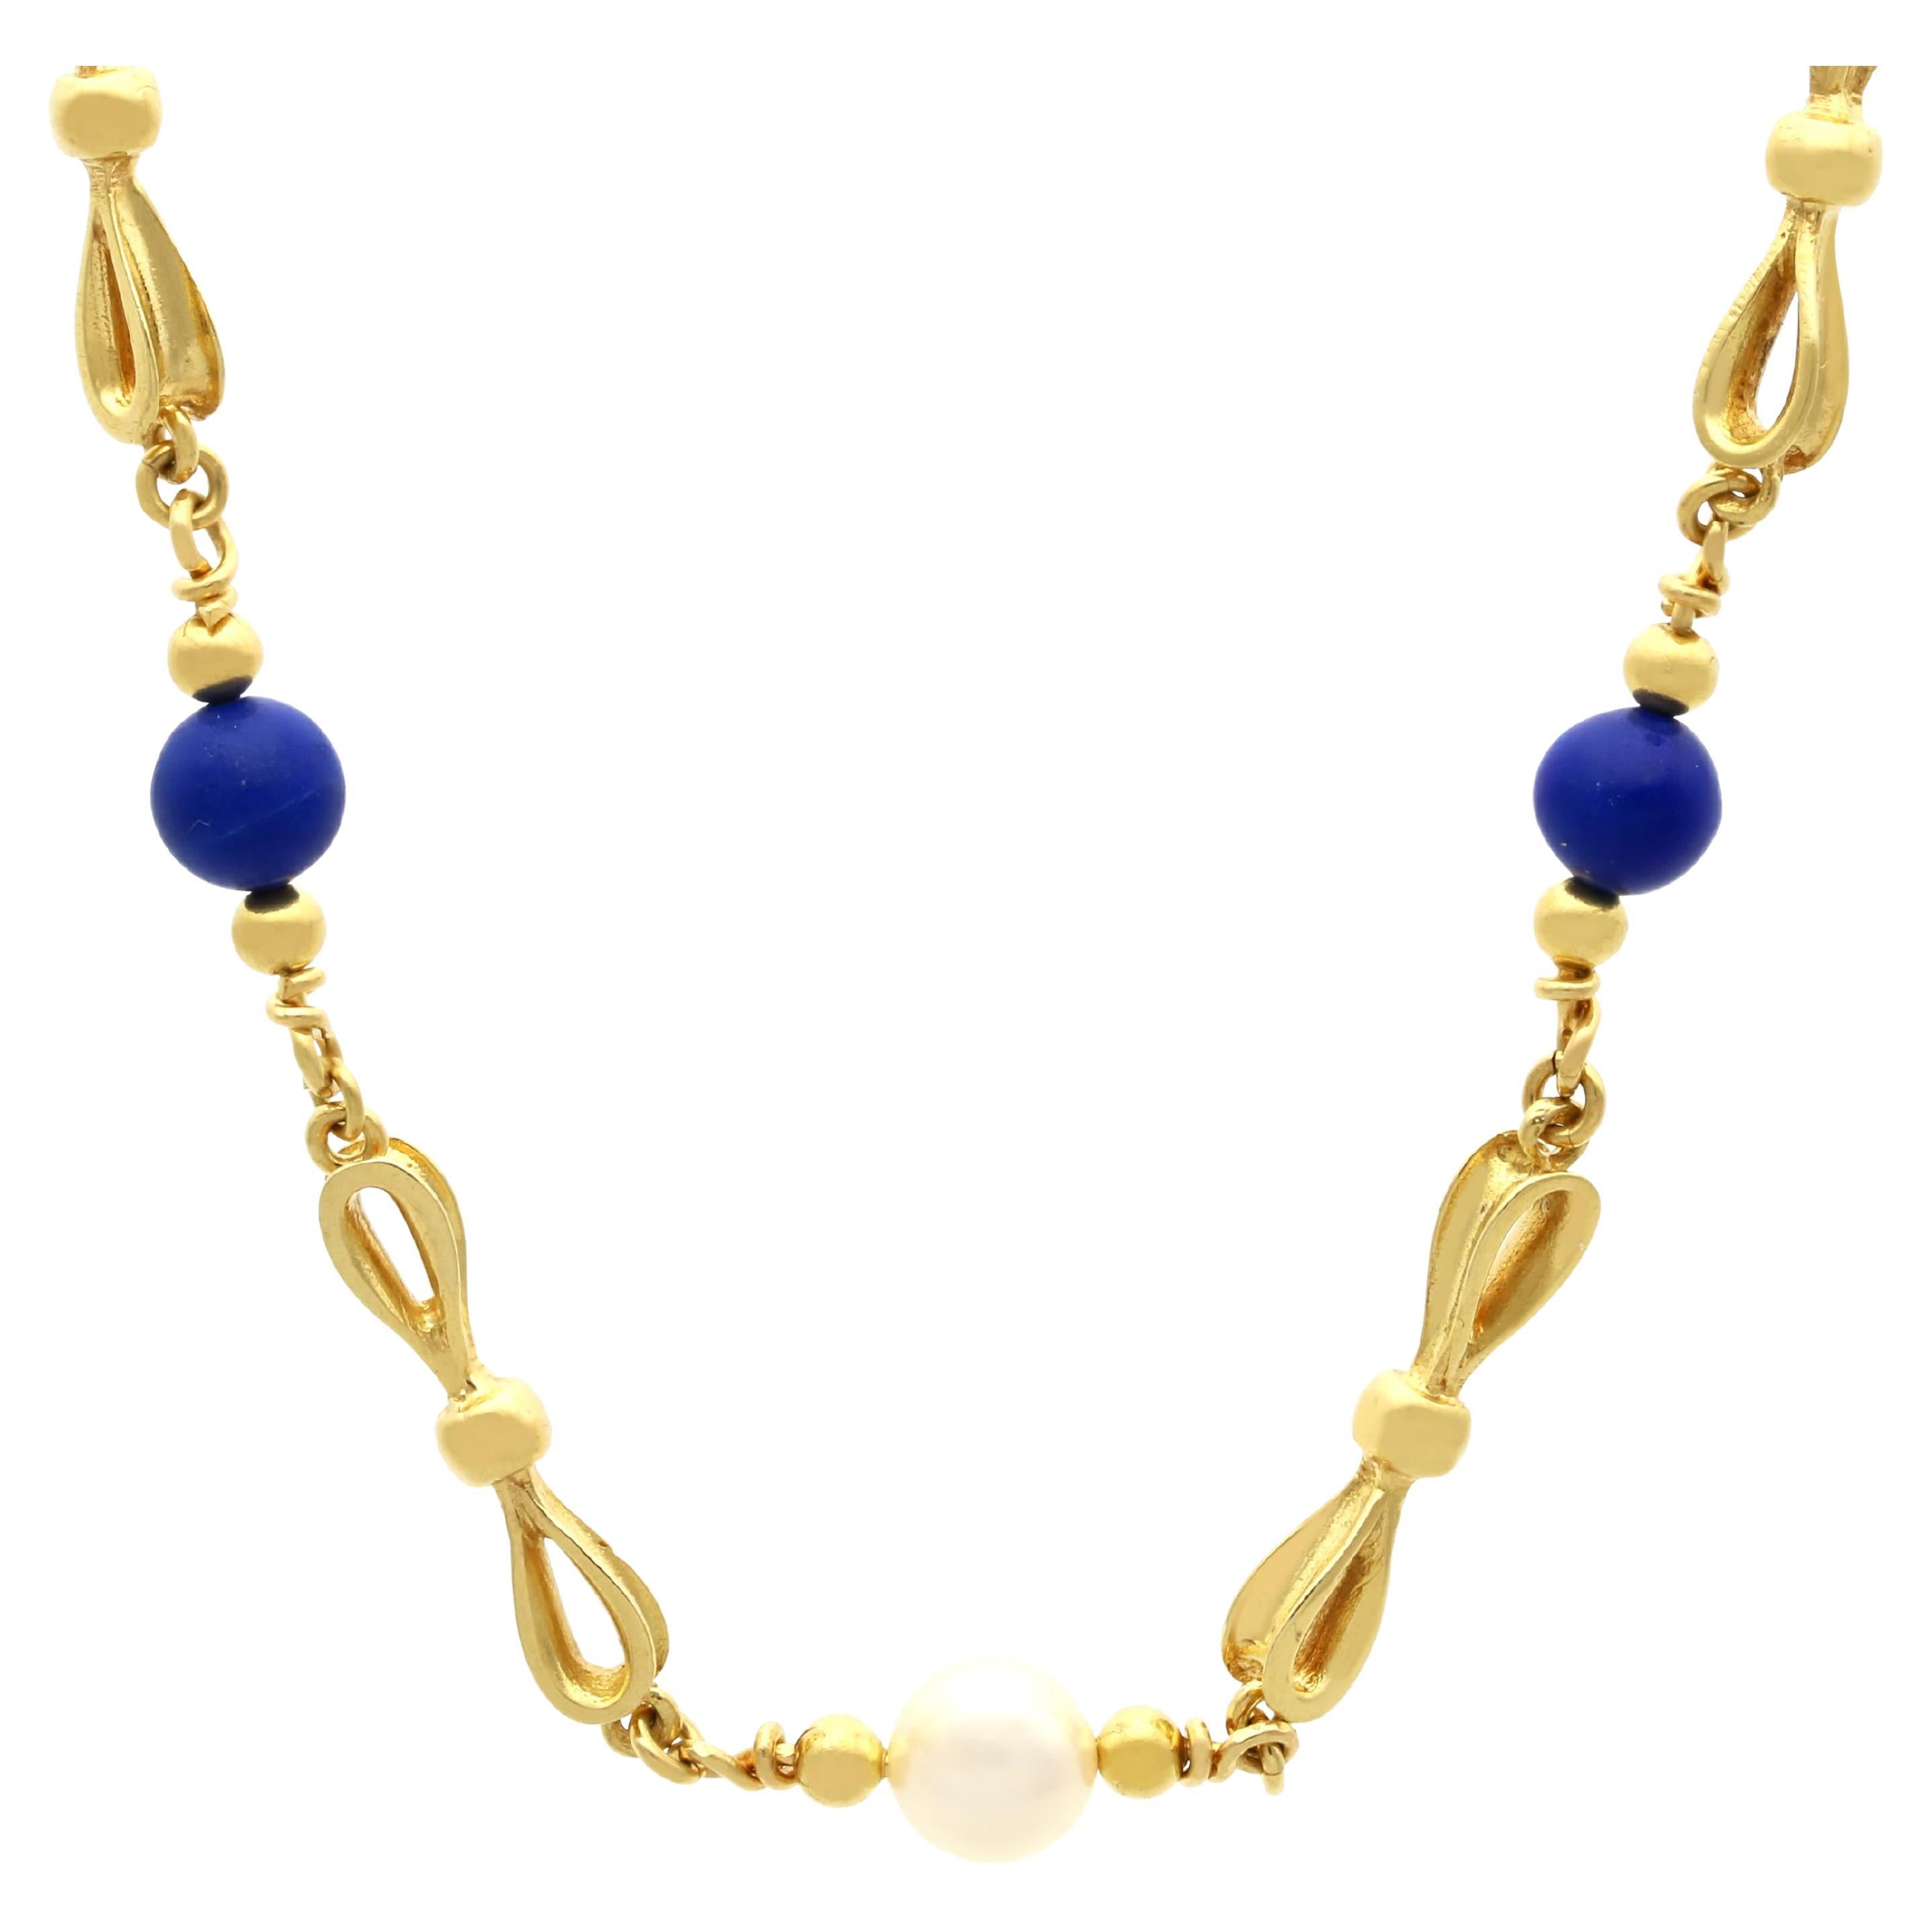 Vintage 7.80 Carat Lapis Lazuli  Pearl Chain Necklace in 18k Yellow Gold For Sale